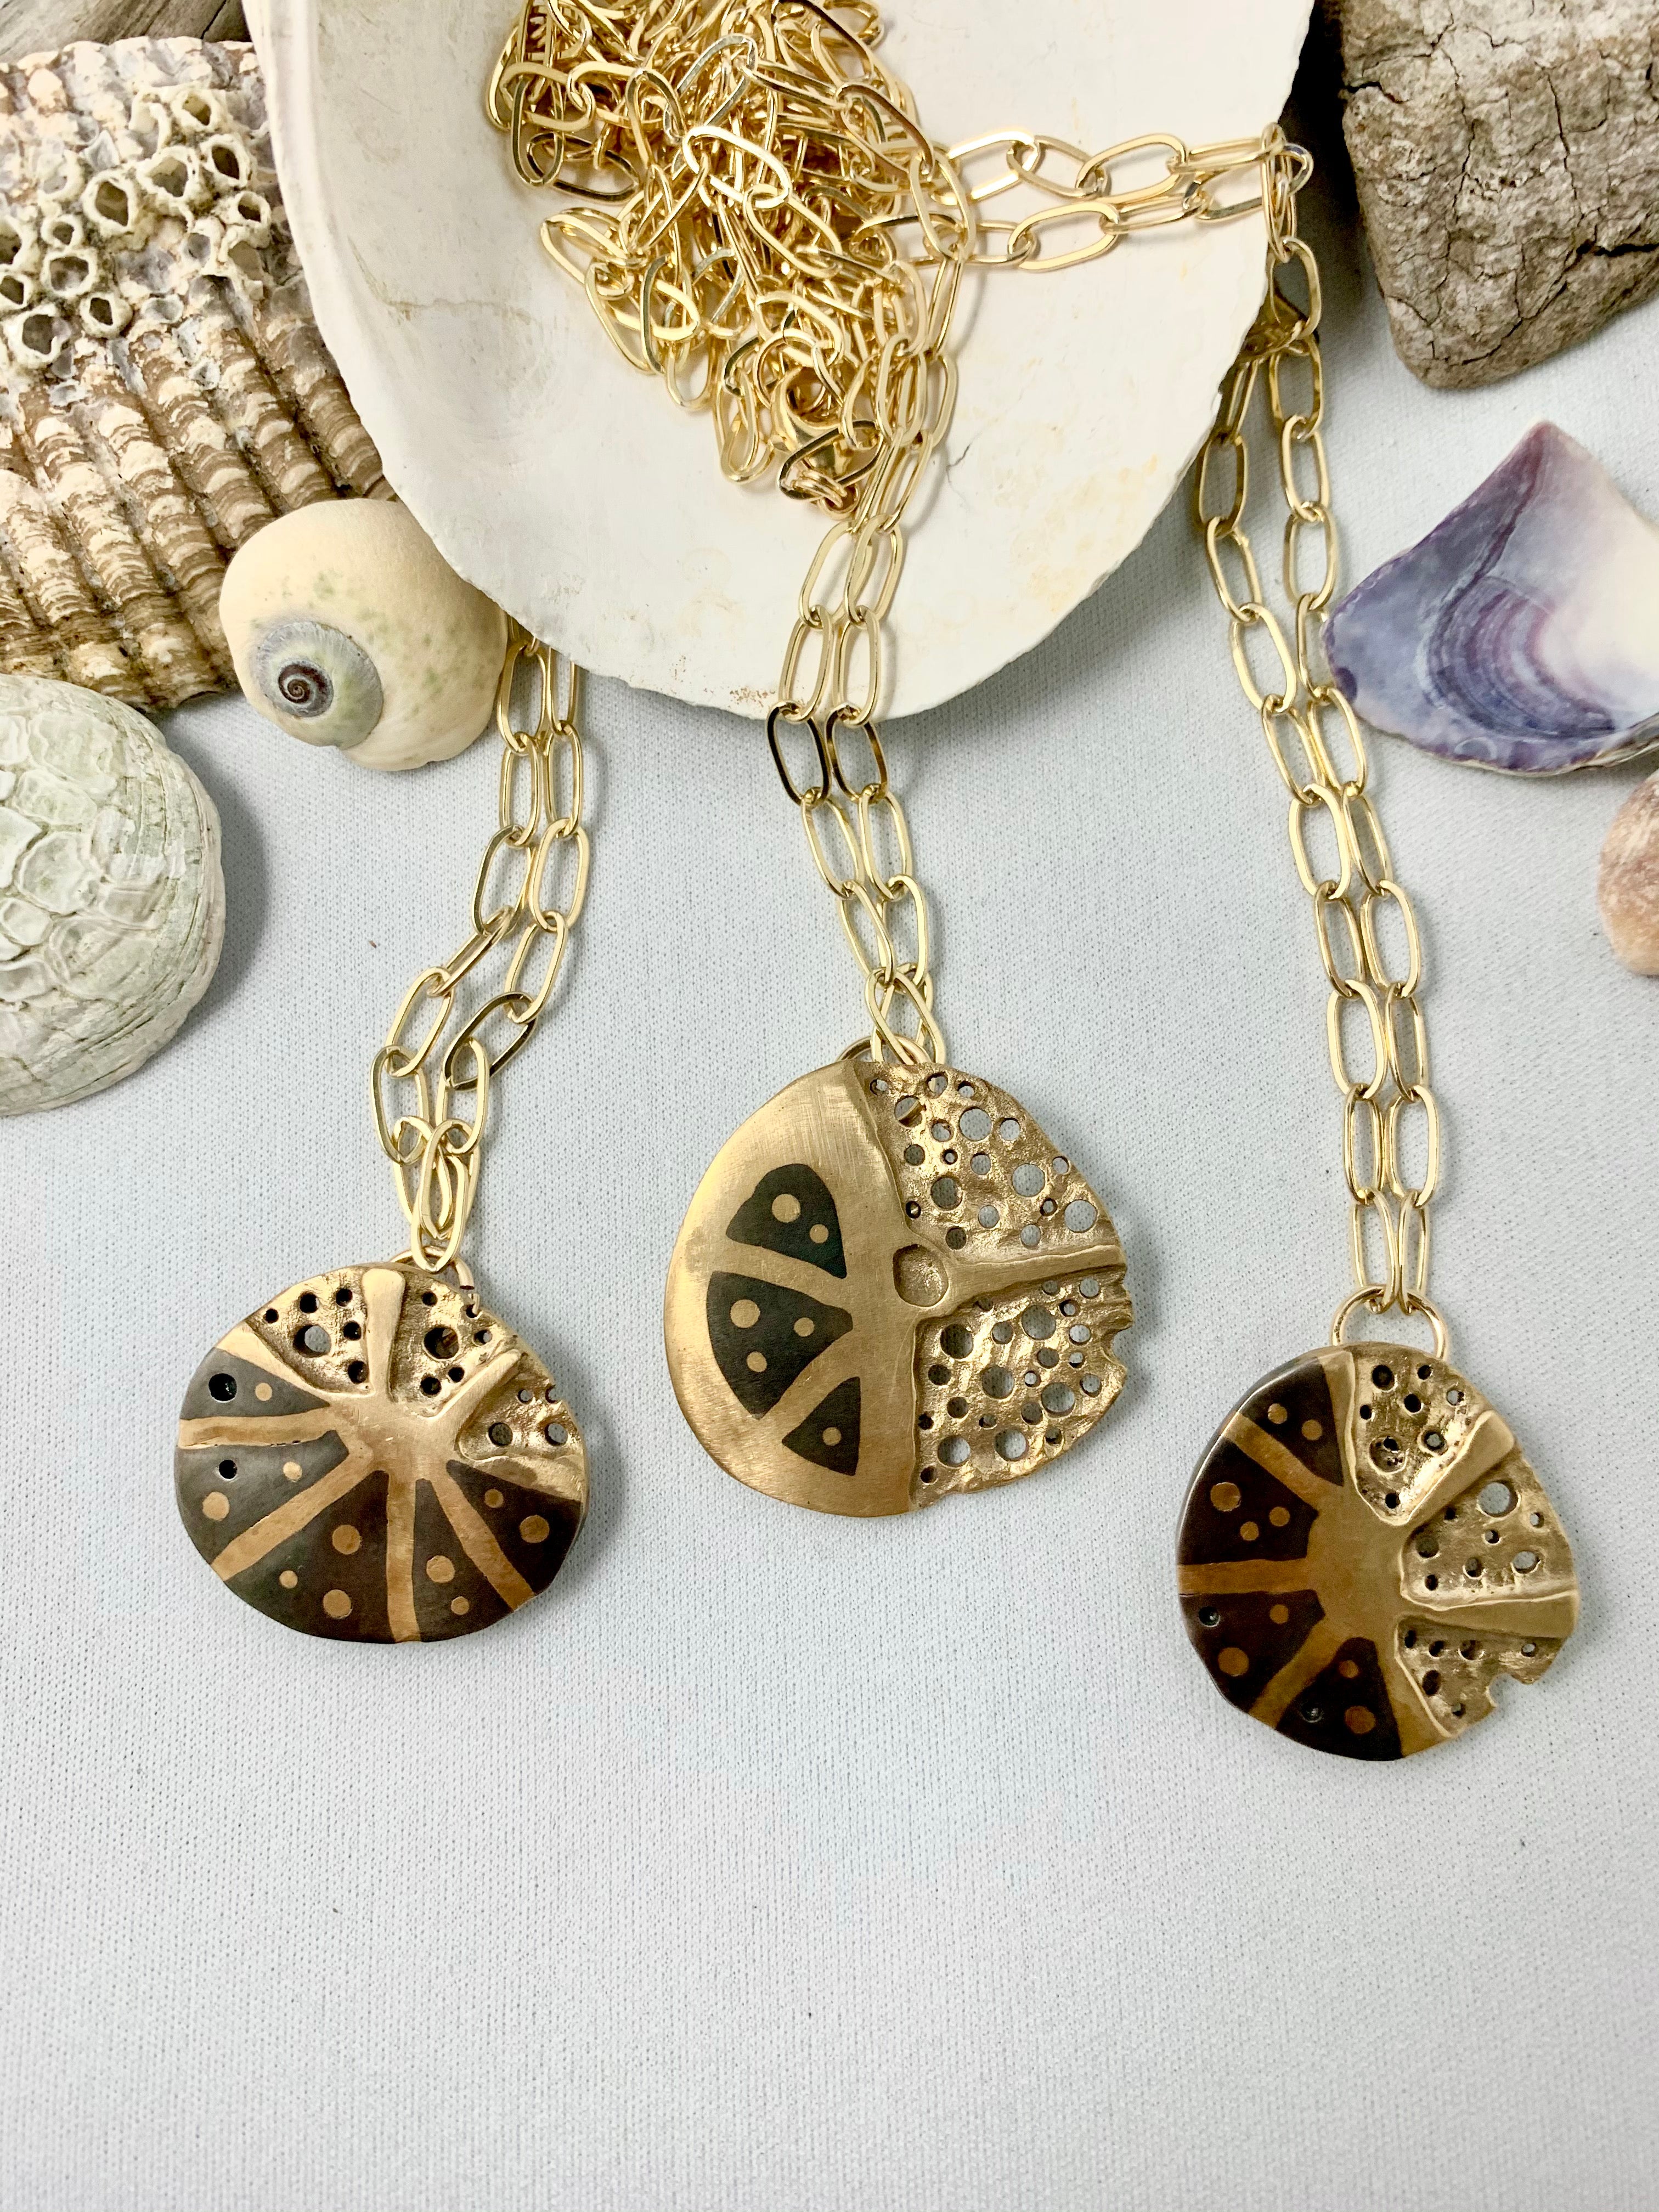 Seashells with coral inspired steel and bronze necklaces